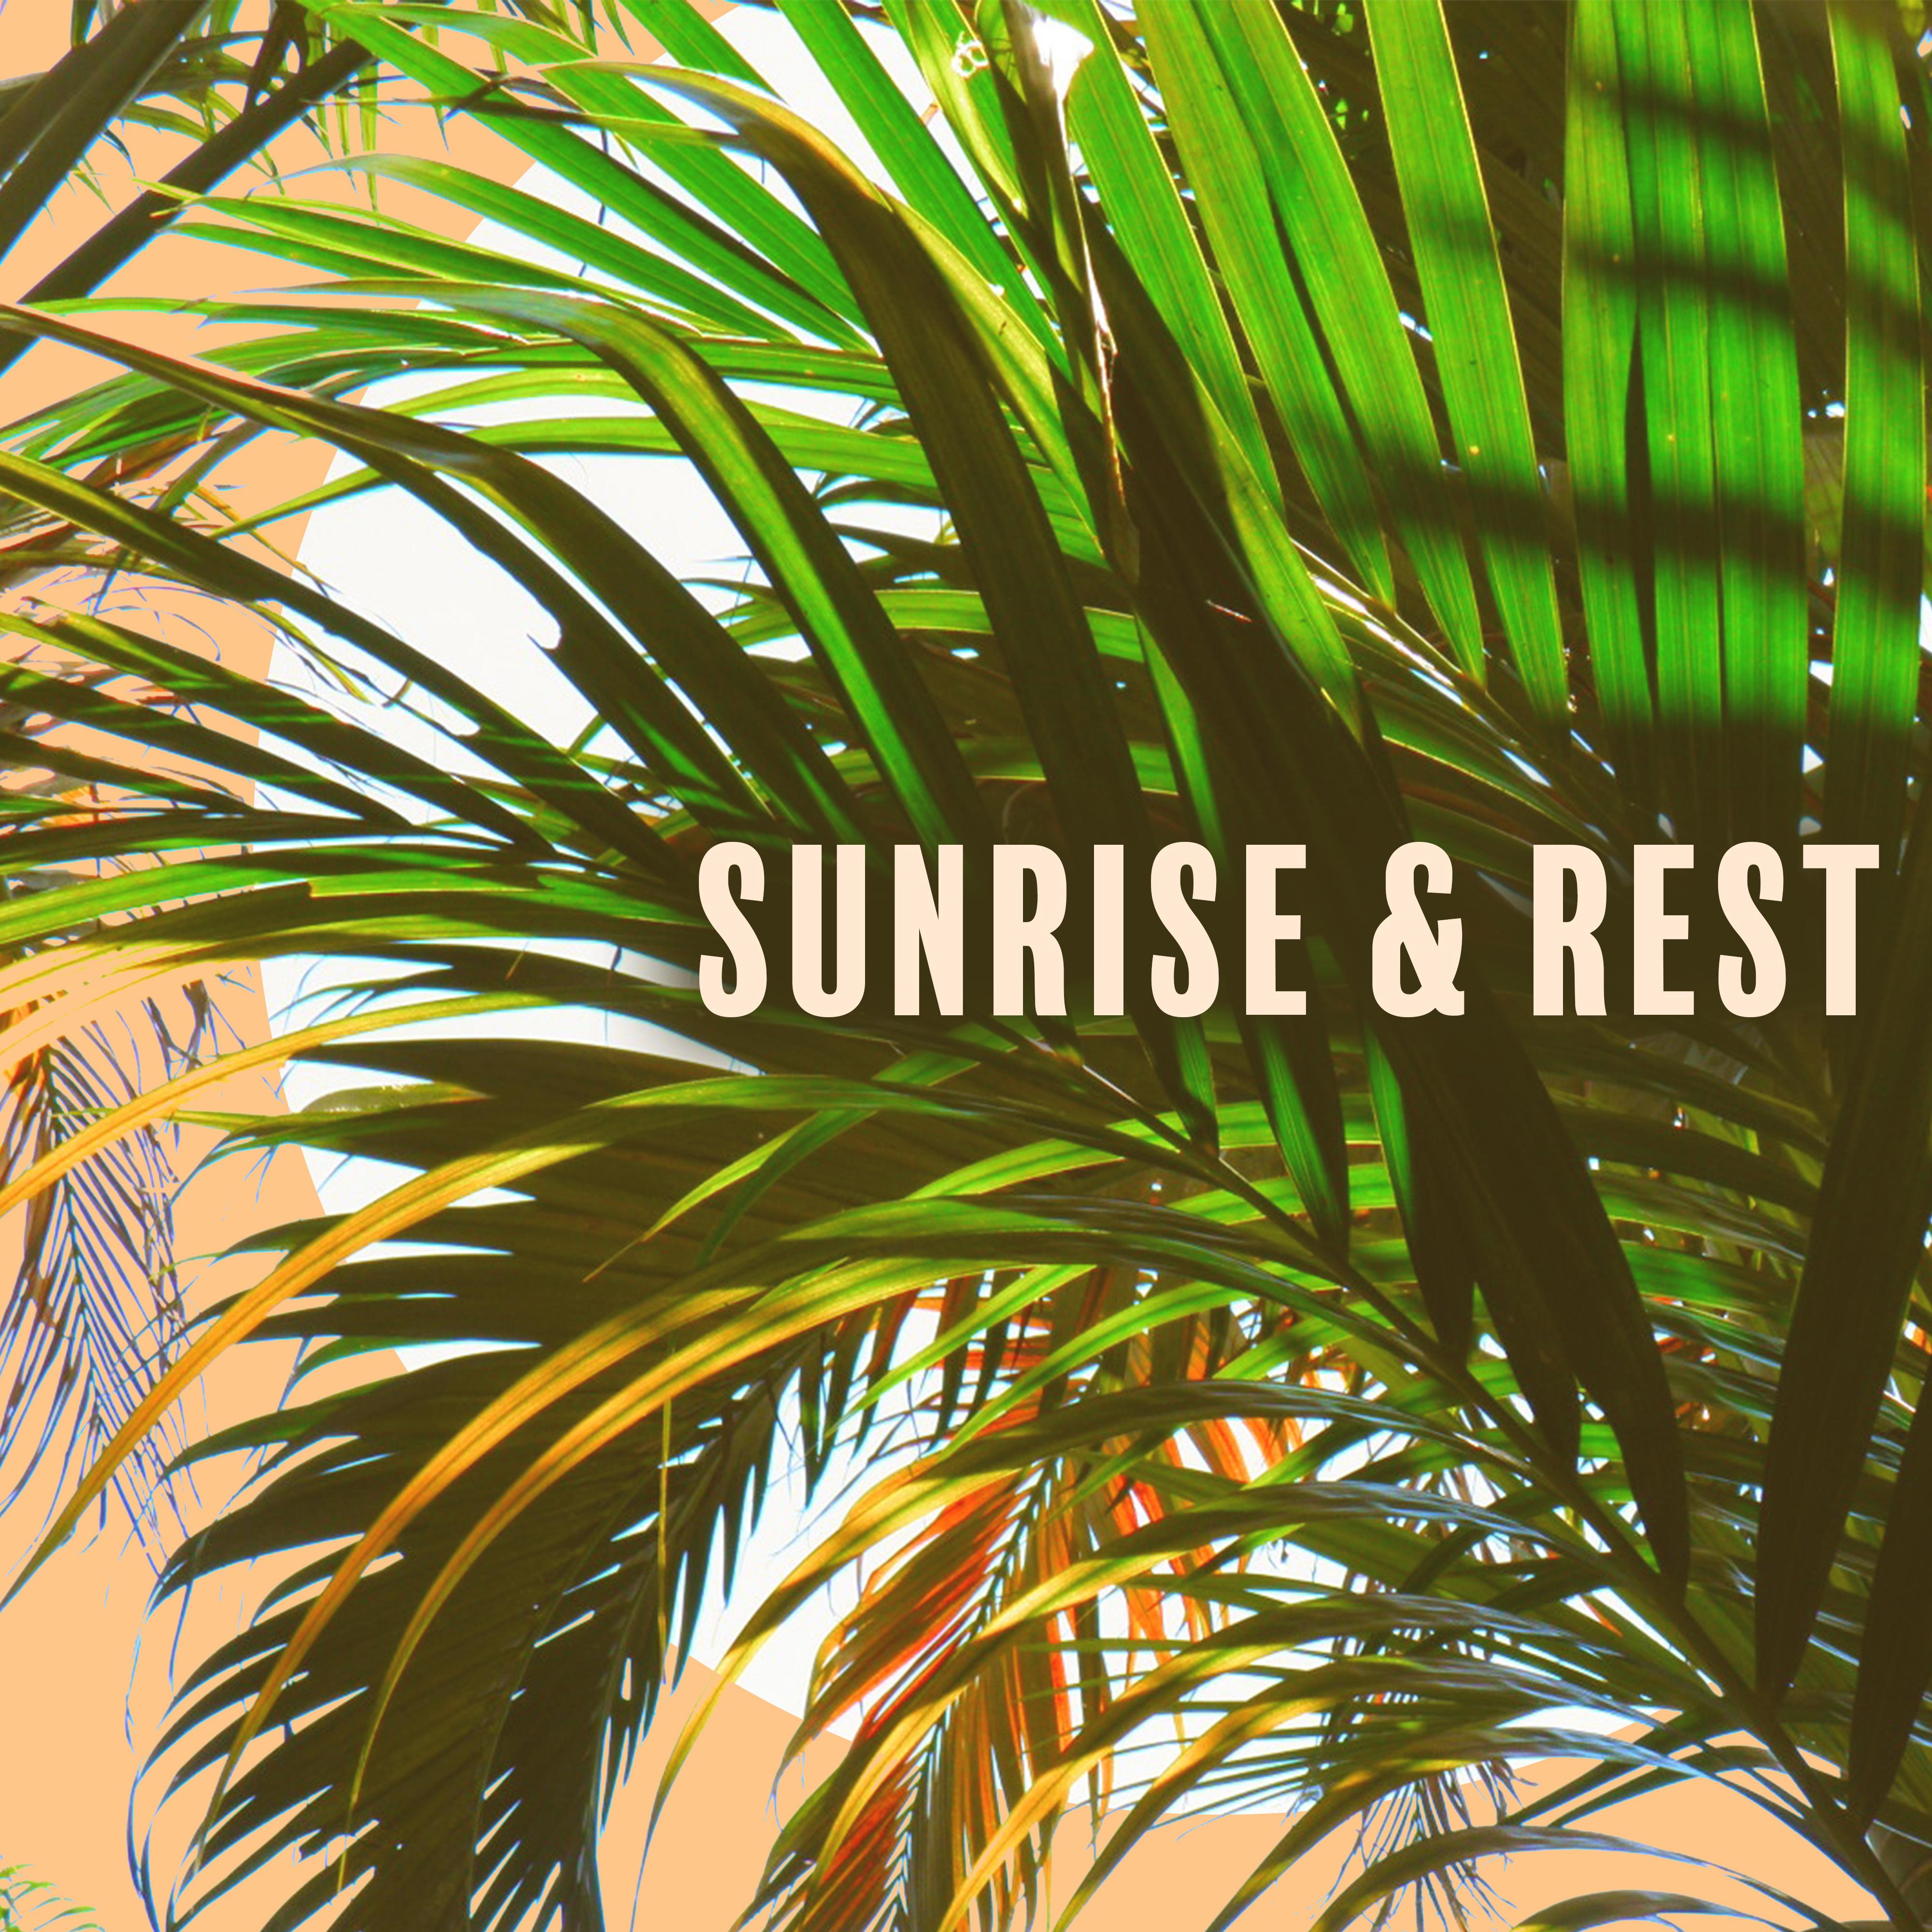 Sunrise & Rest – Chillout Music, Pure Waves, Relaxation Day, Calm Sounds, Total Relaxation